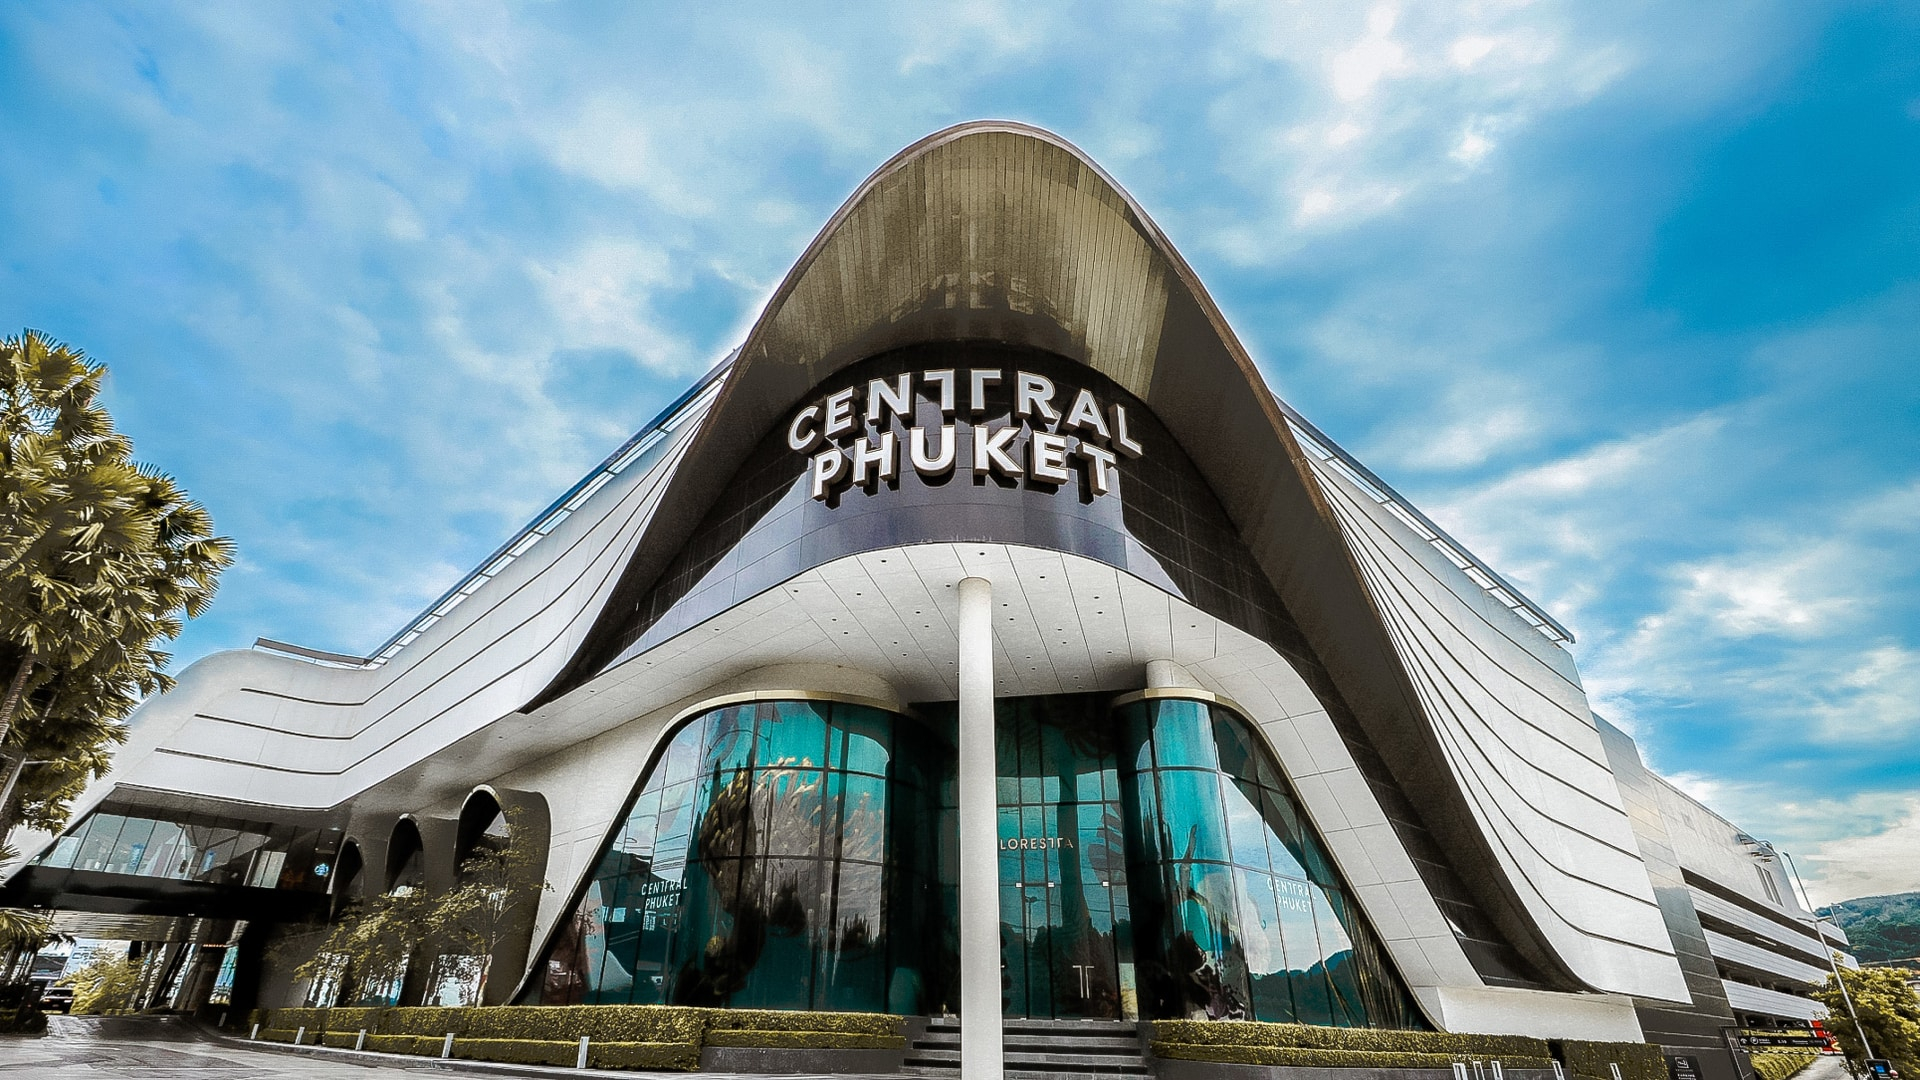 Thailand's top retail property developer launches 'Central Phuket', the  first 'Luxury & Leisure' Beach Lifestyle Shopping Destination in Asia